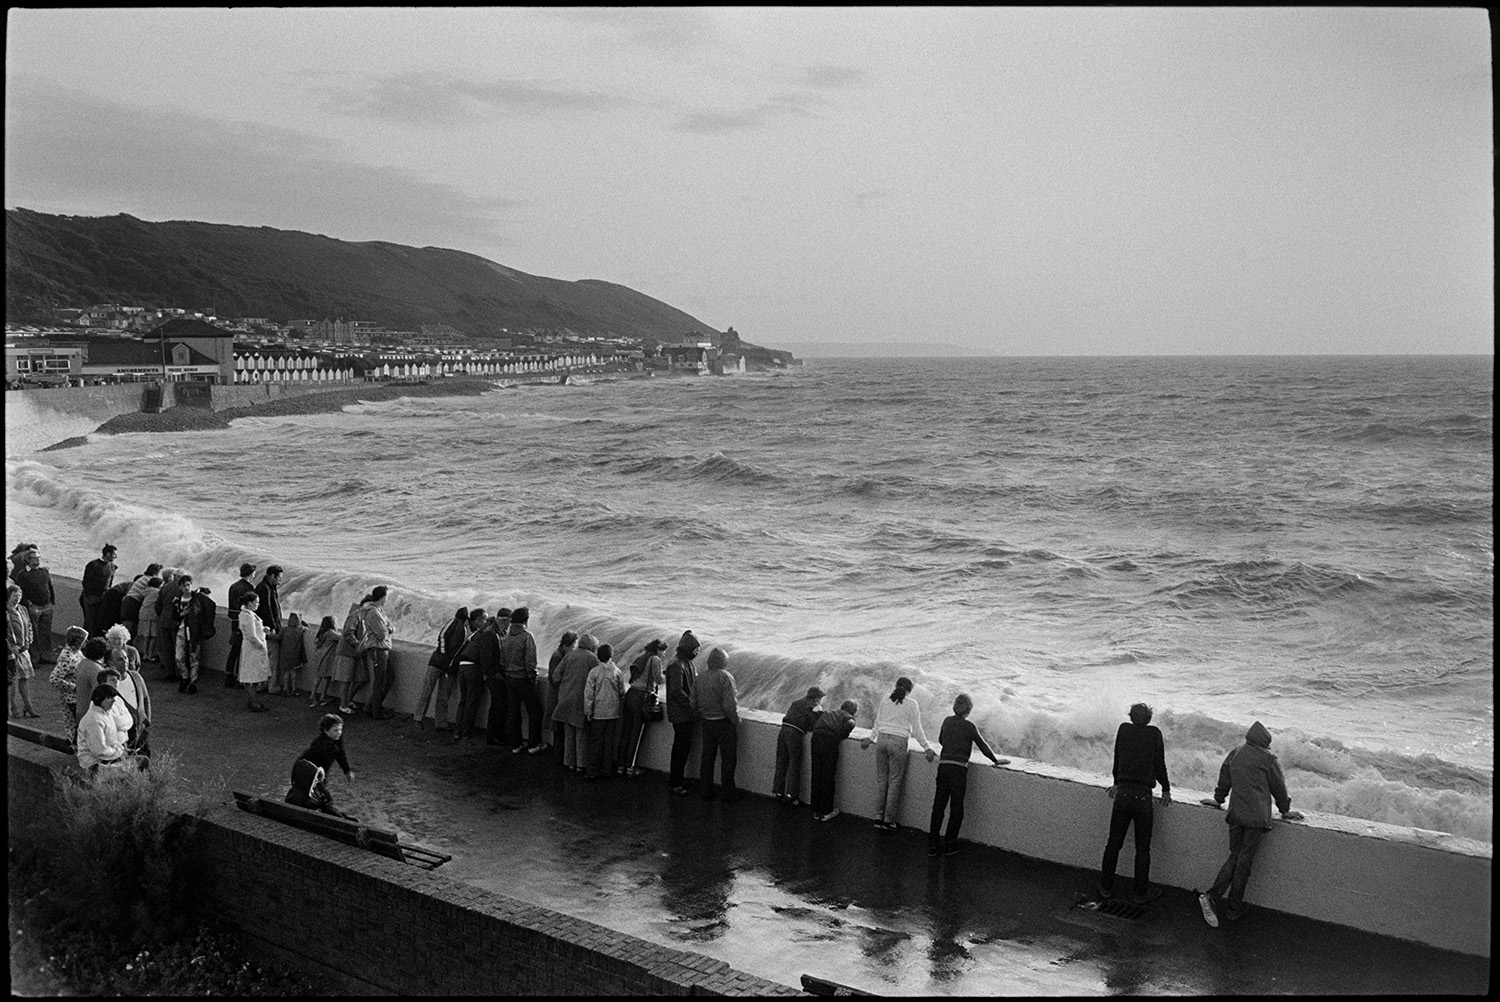 Holidaymakers watching rough sea breaking over sea wall, dodging waves. 
[Holidaymakers watching waves break against the seawall at Westward Ho!. They are lined up along the wall. The town of Westward Ho! can be seen in the background.]